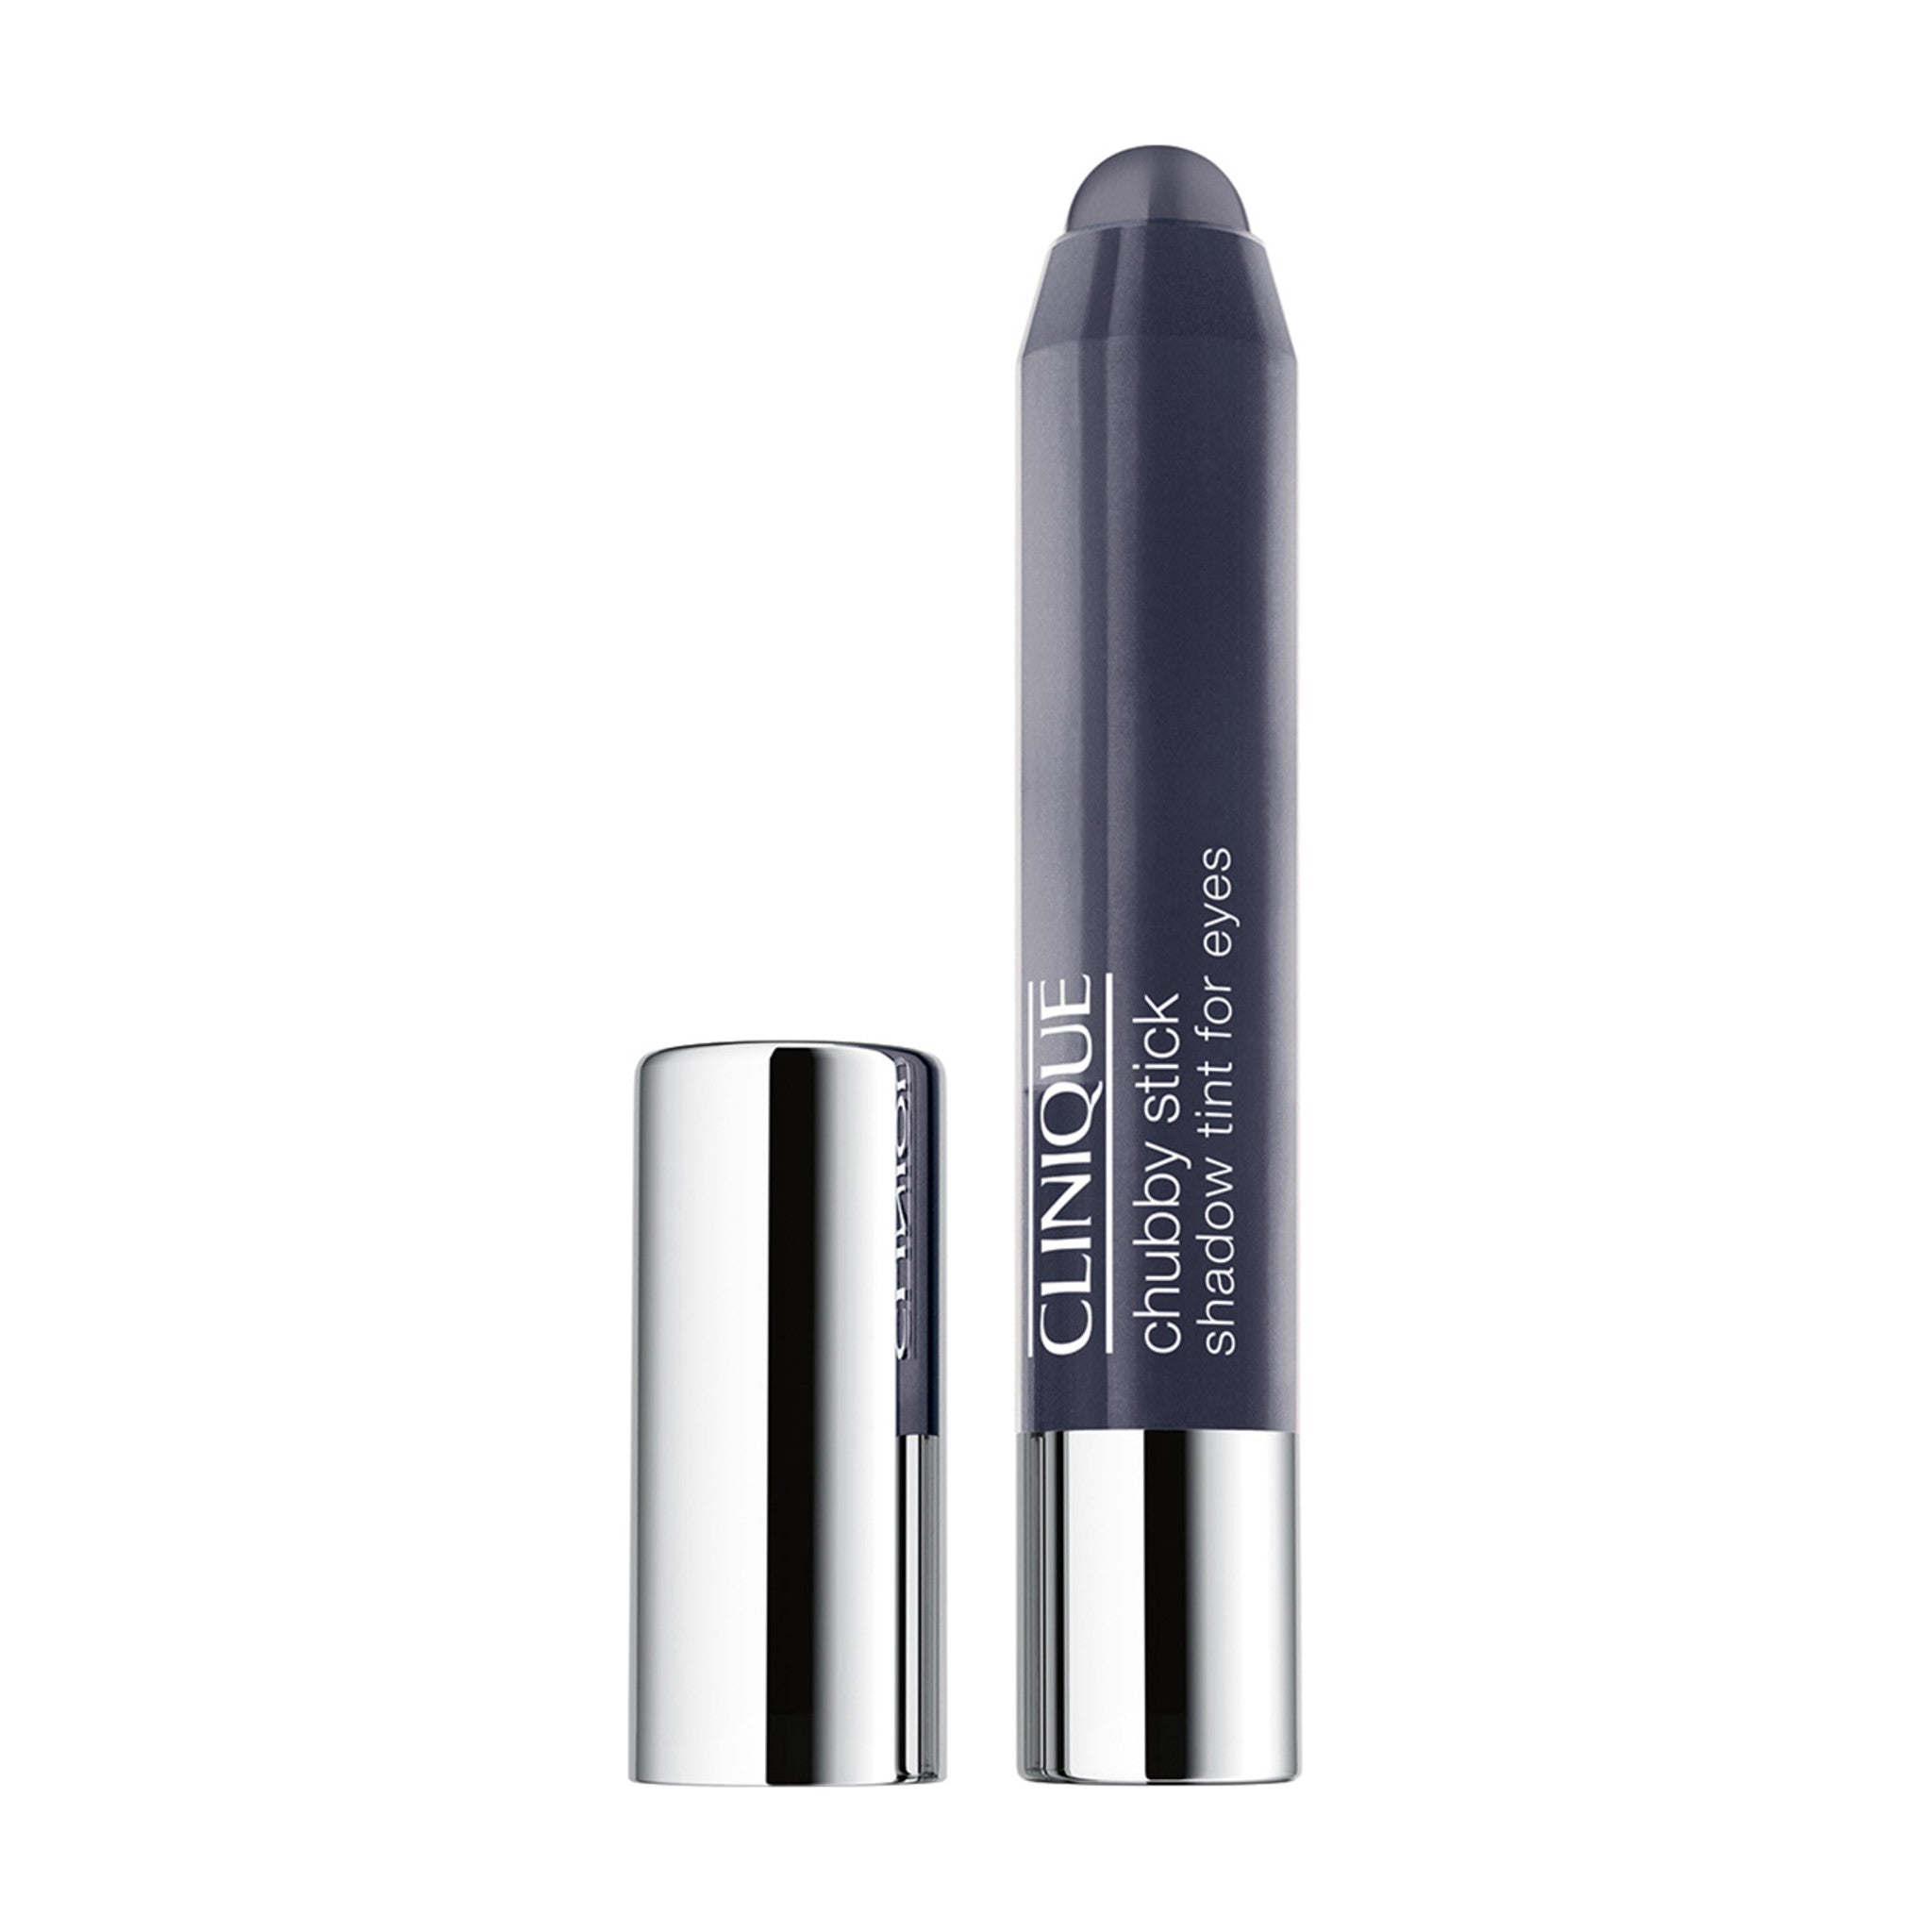 Clinique Chubby Stick Shadow Tint For Eyes Color/Shade variant: Curvaceous Coal main image.